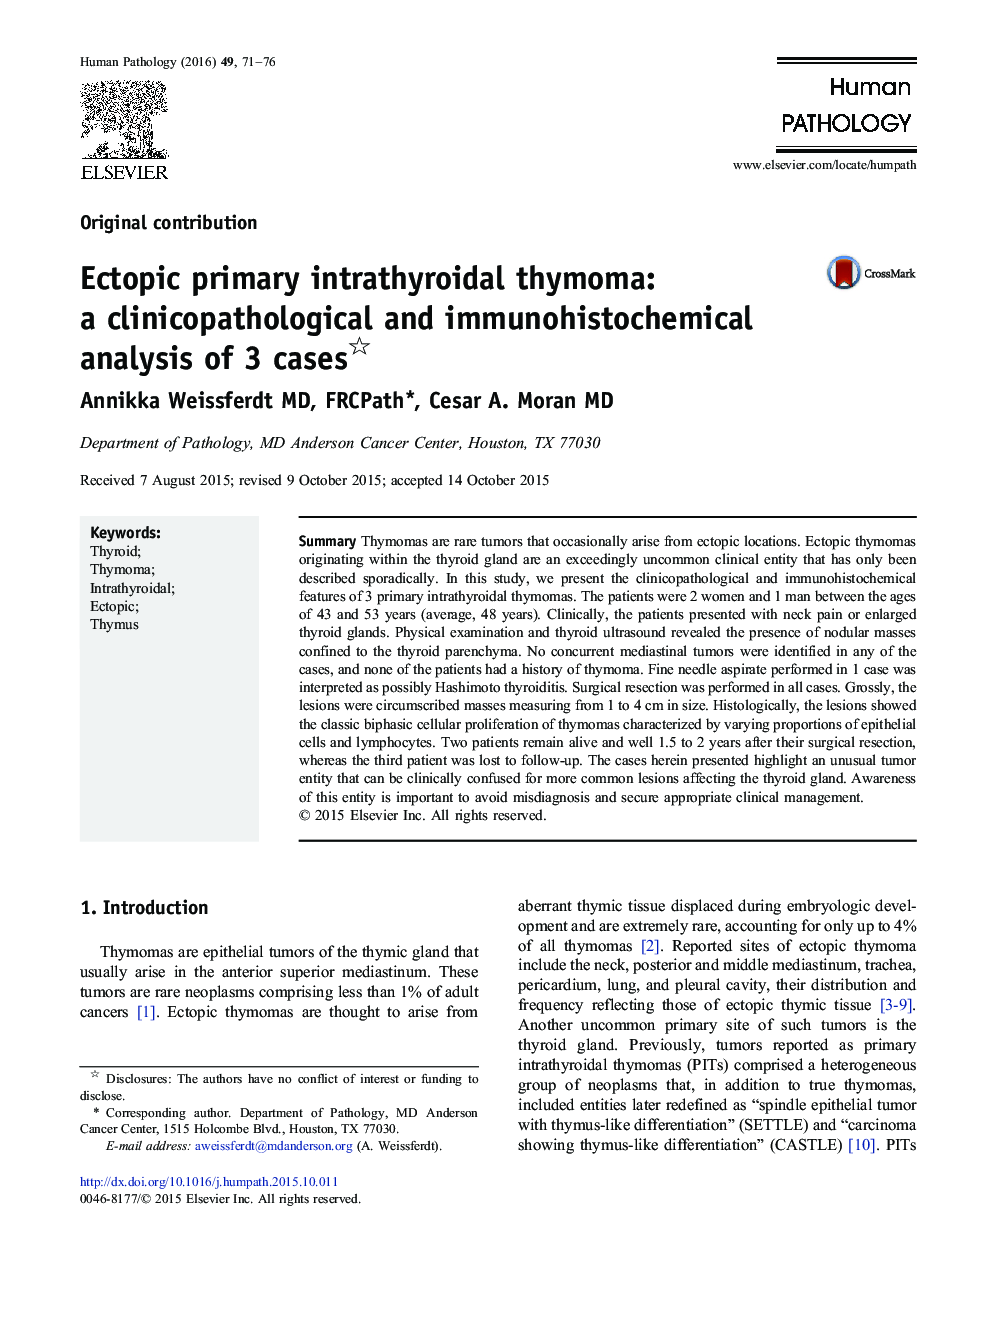 Ectopic primary intrathyroidal thymoma: a clinicopathological and immunohistochemical analysis of 3 cases 